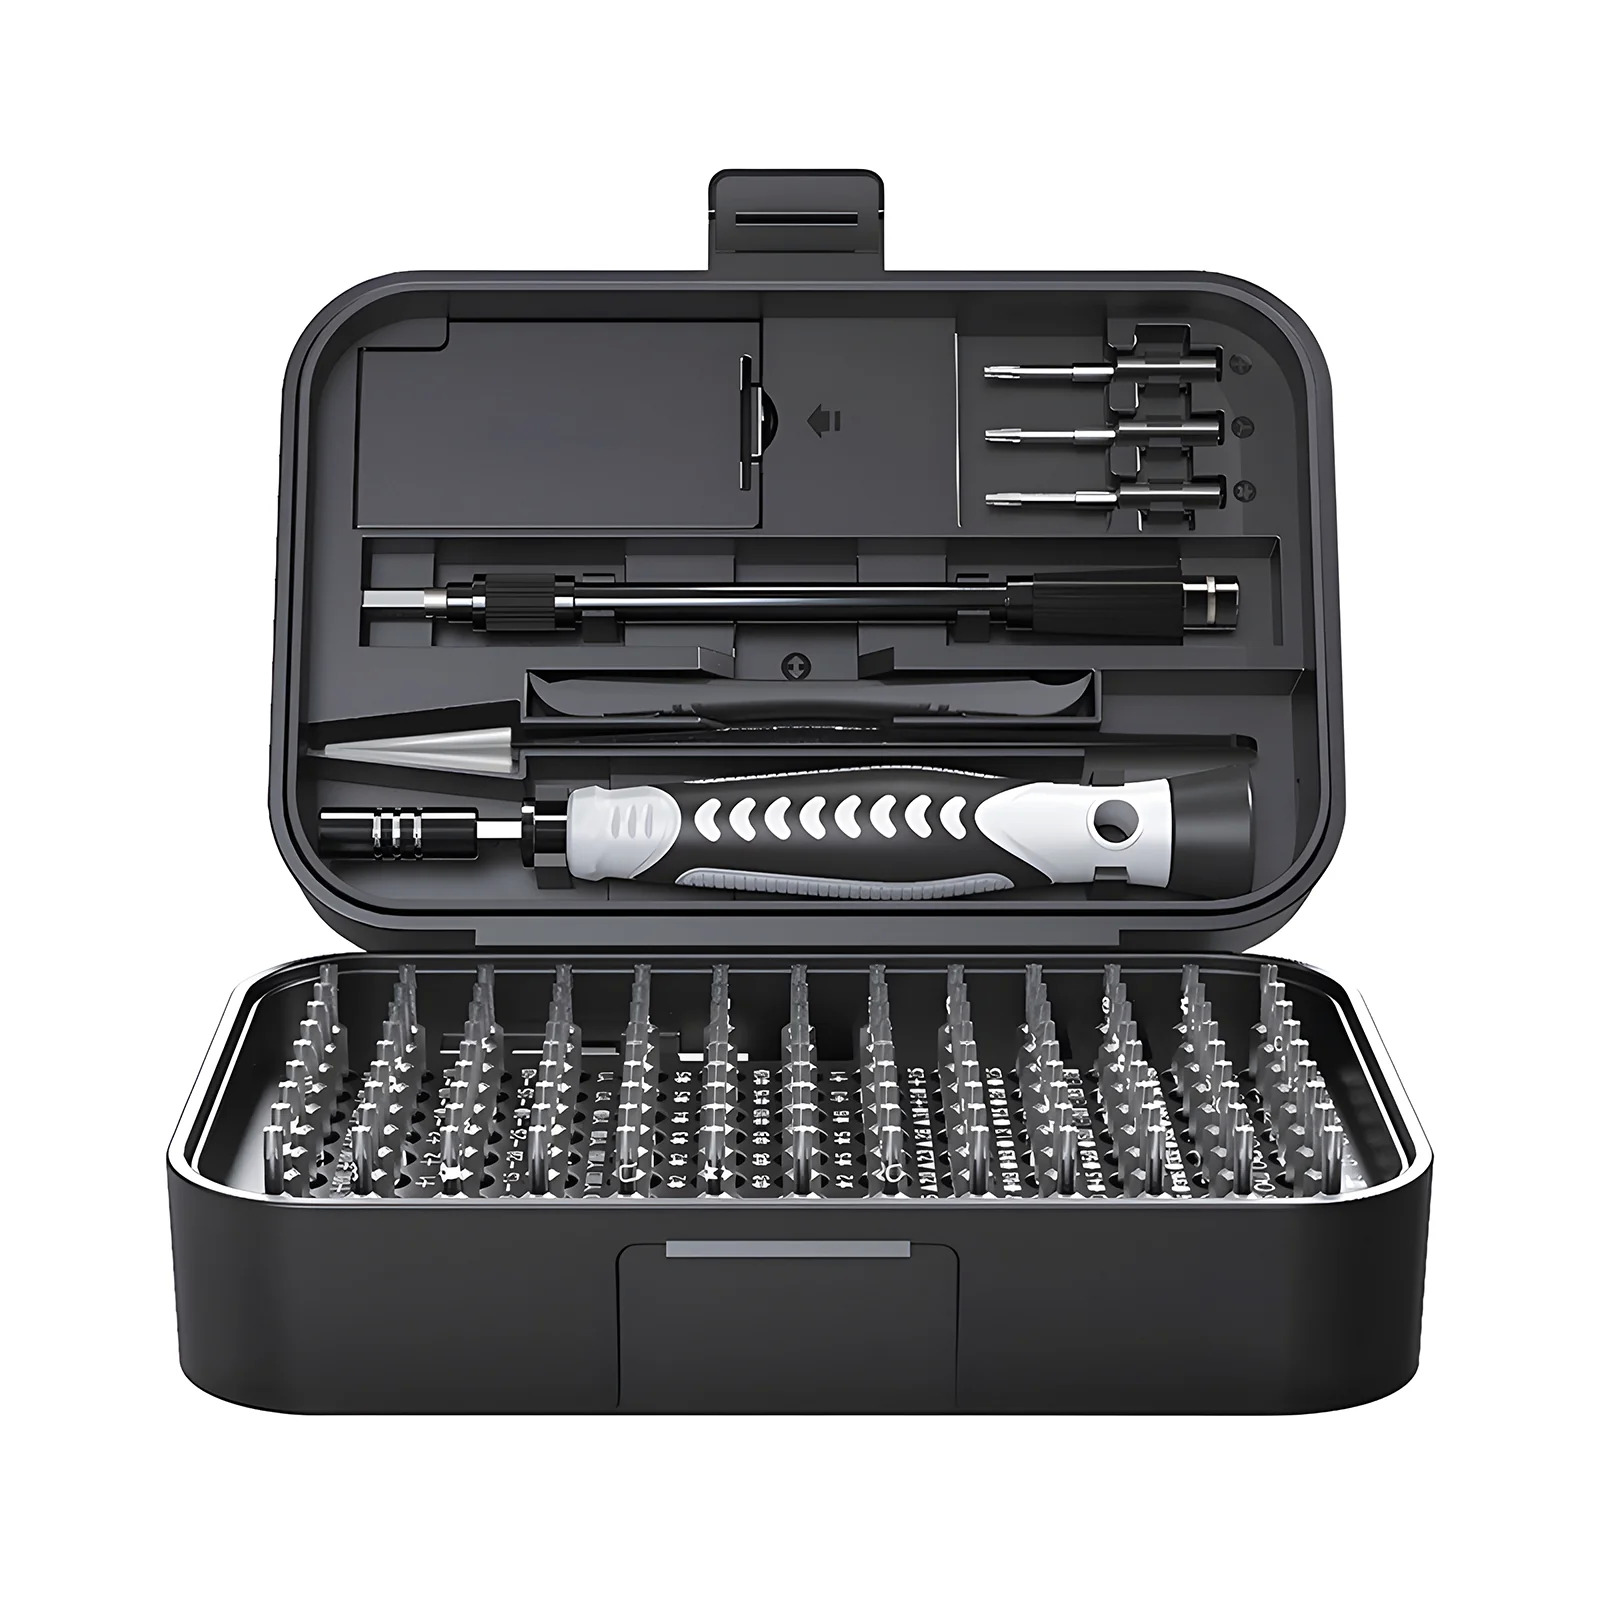 130-Piece Precision Screwdriver and Bit Set with Storage Case - With Code $20